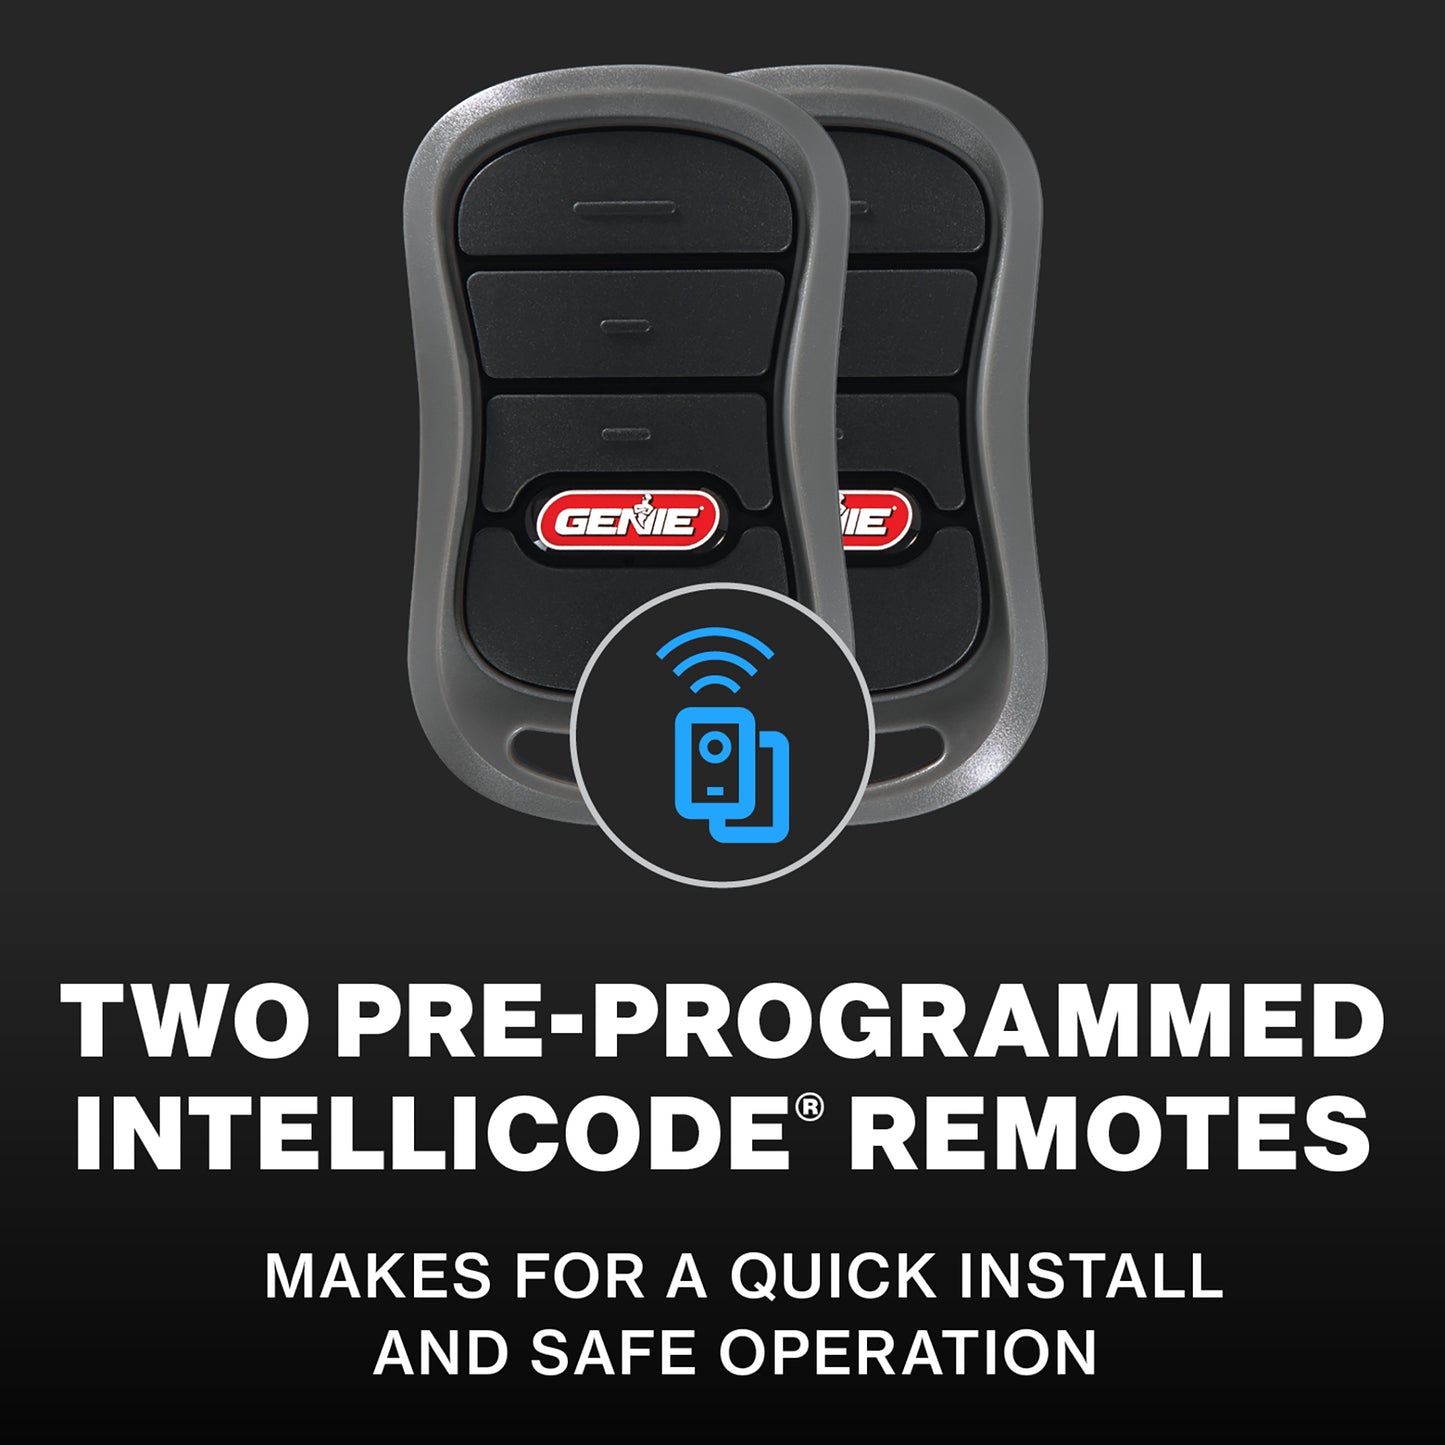 Two preprogrammed remotes makes for a quick garage door opener installation on the Genie screwdrive